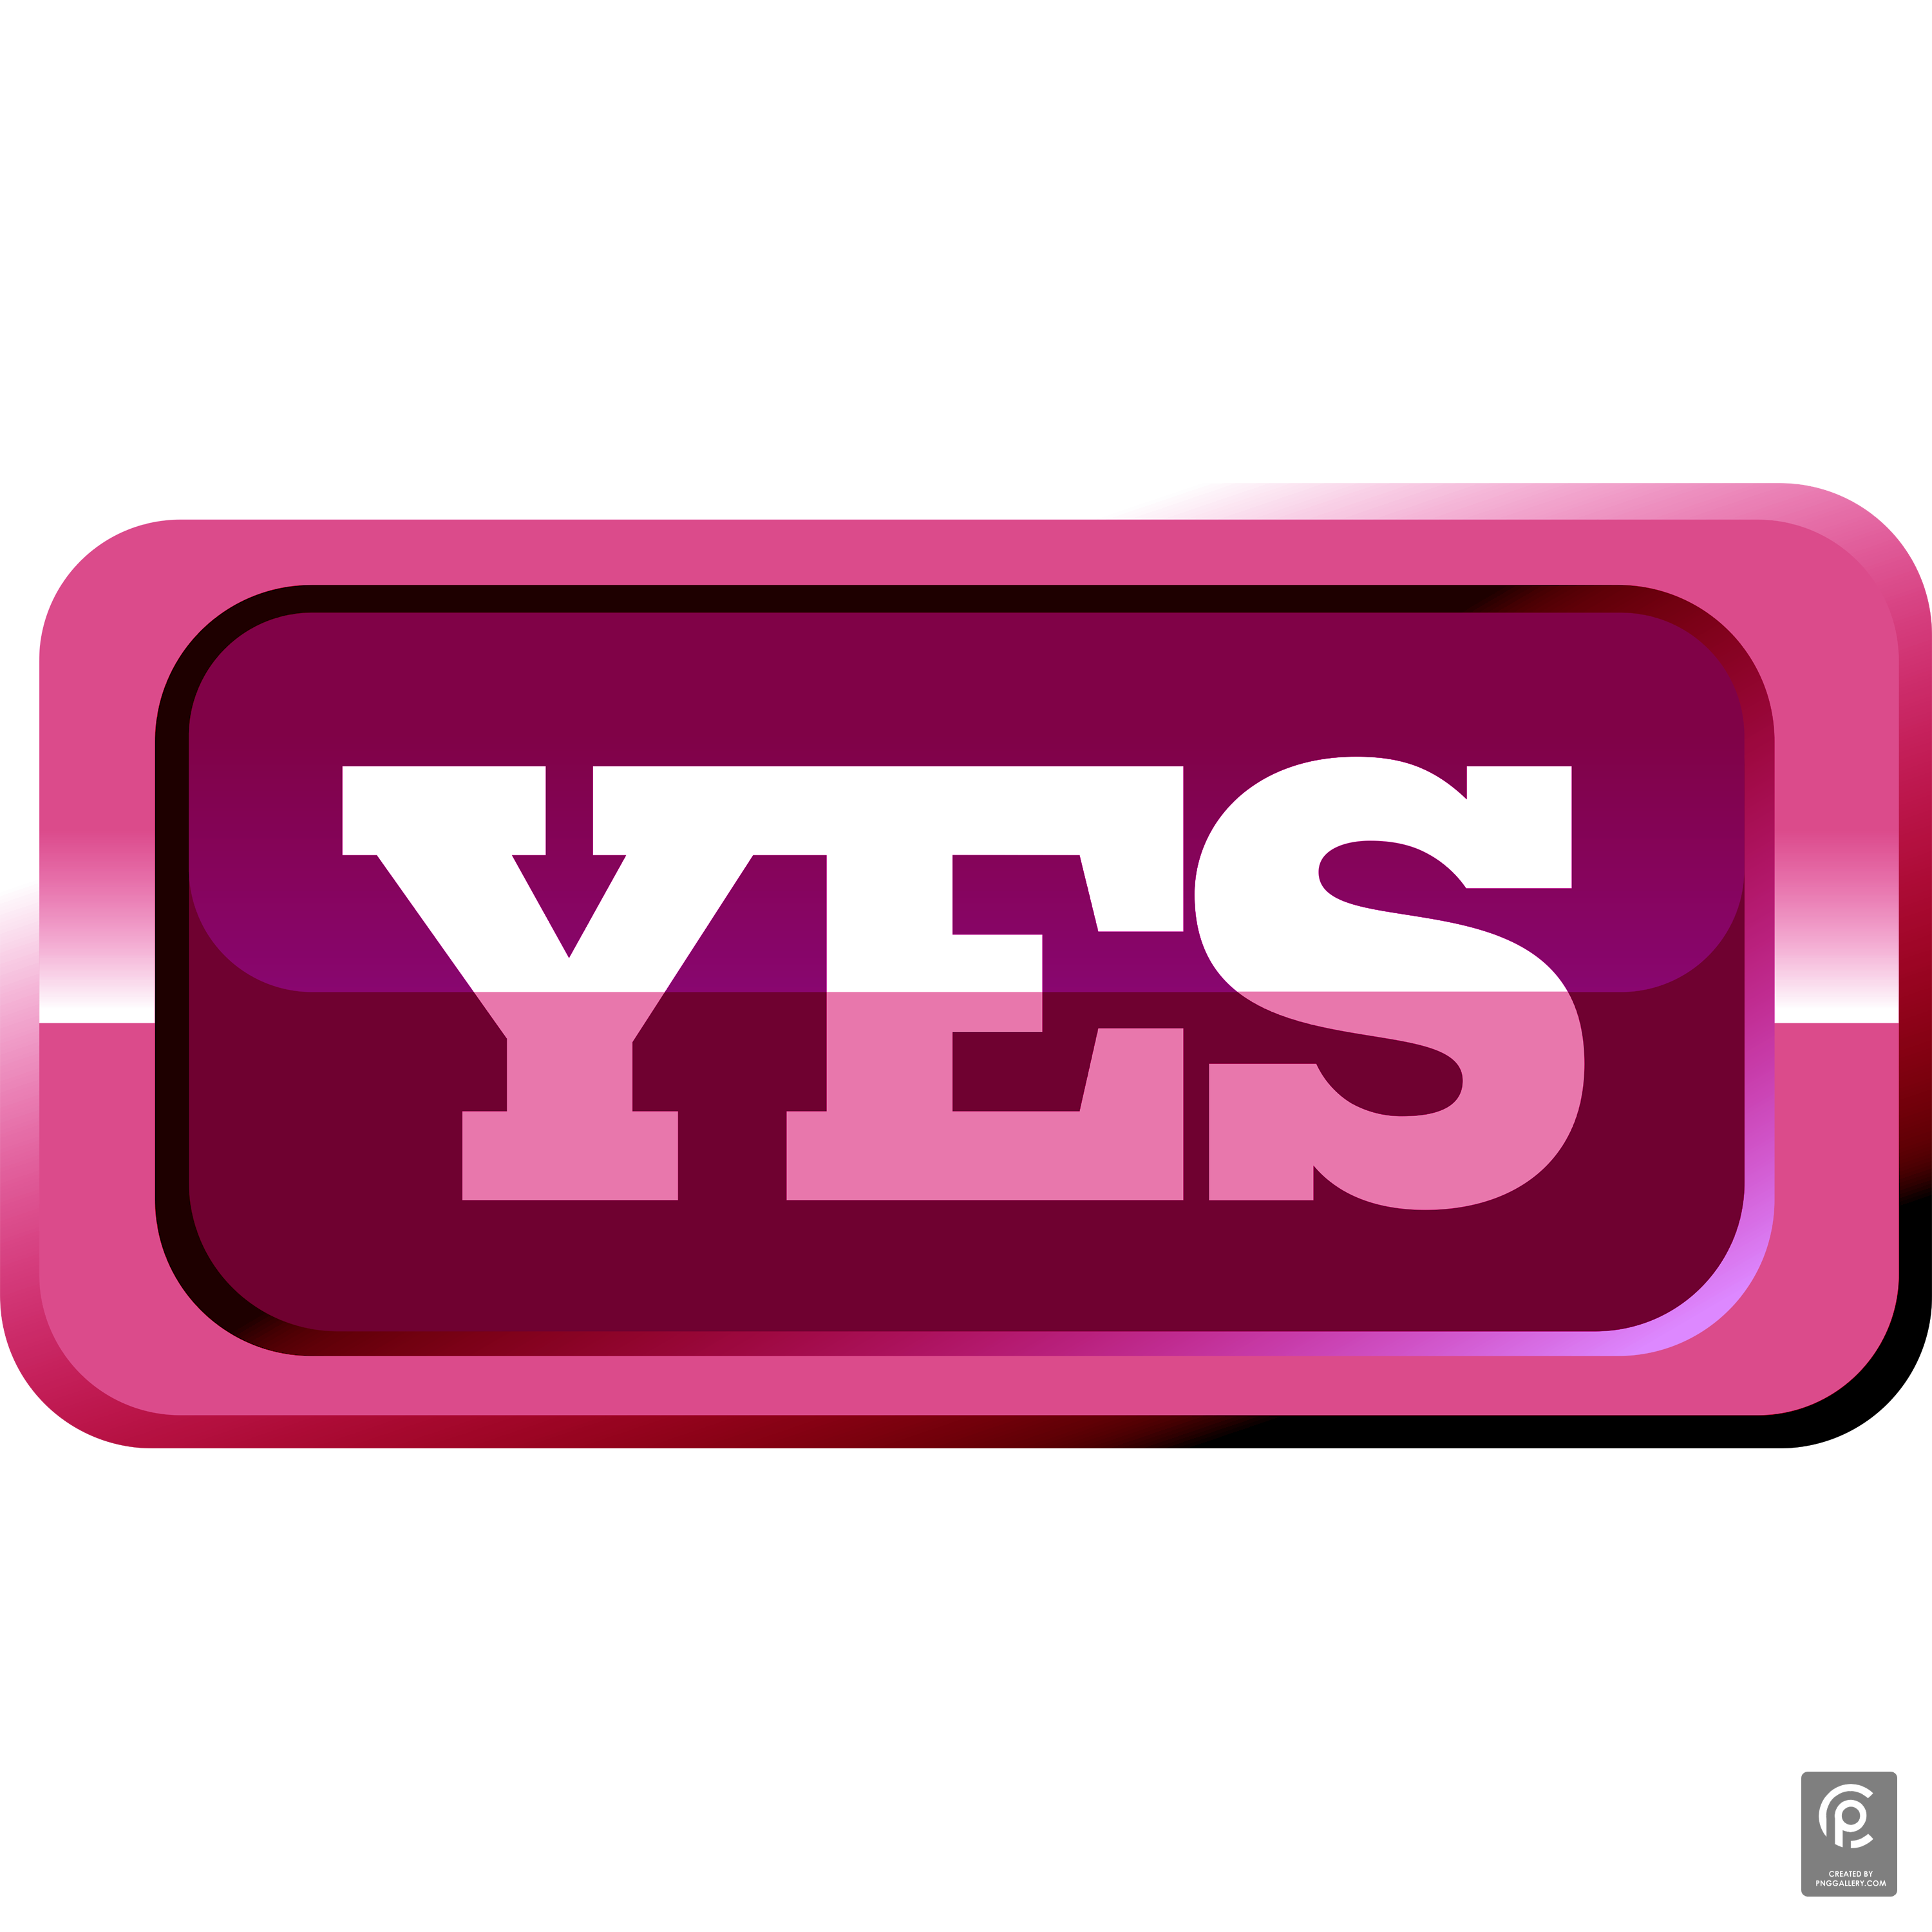 YES Network Logo Transparent Picture